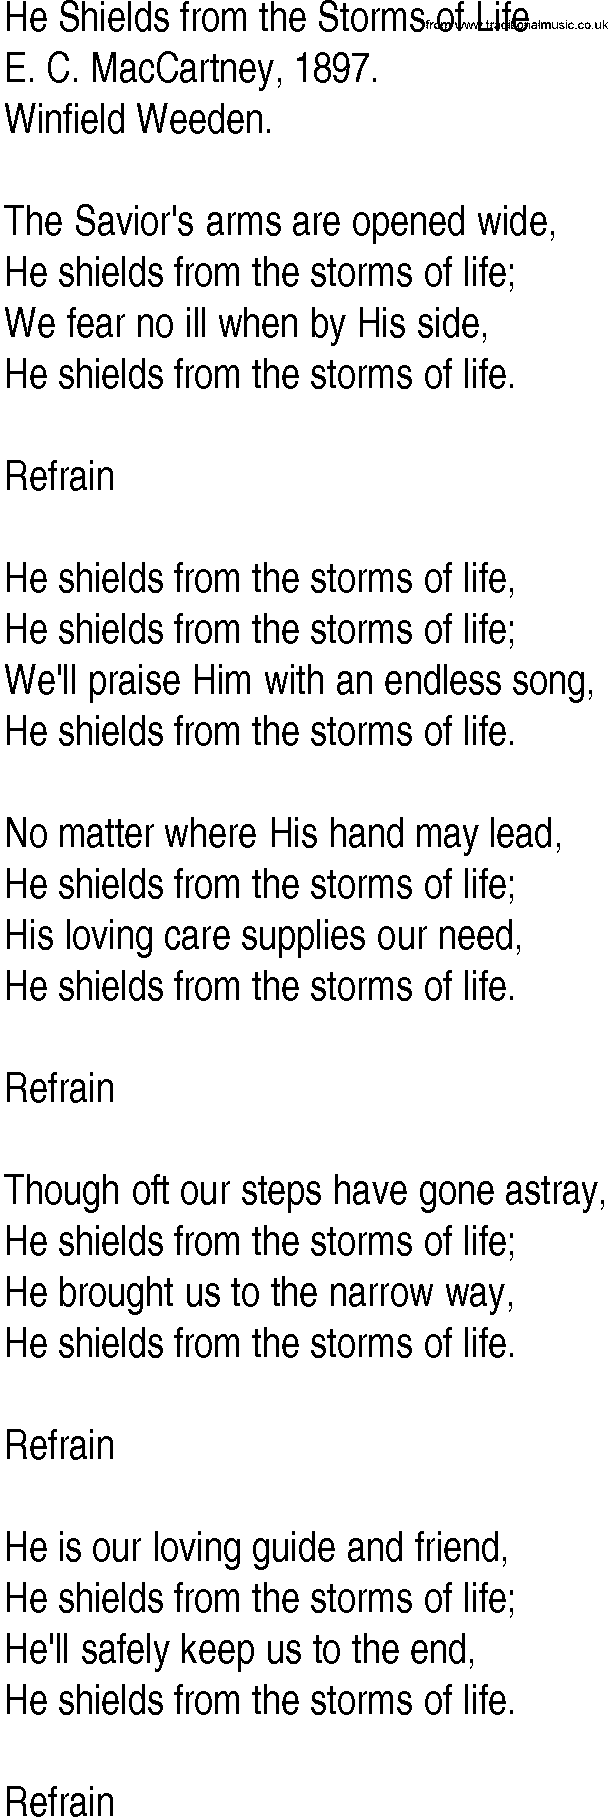 Hymn and Gospel Song: He Shields from the Storms of Life by E C MacCartney lyrics